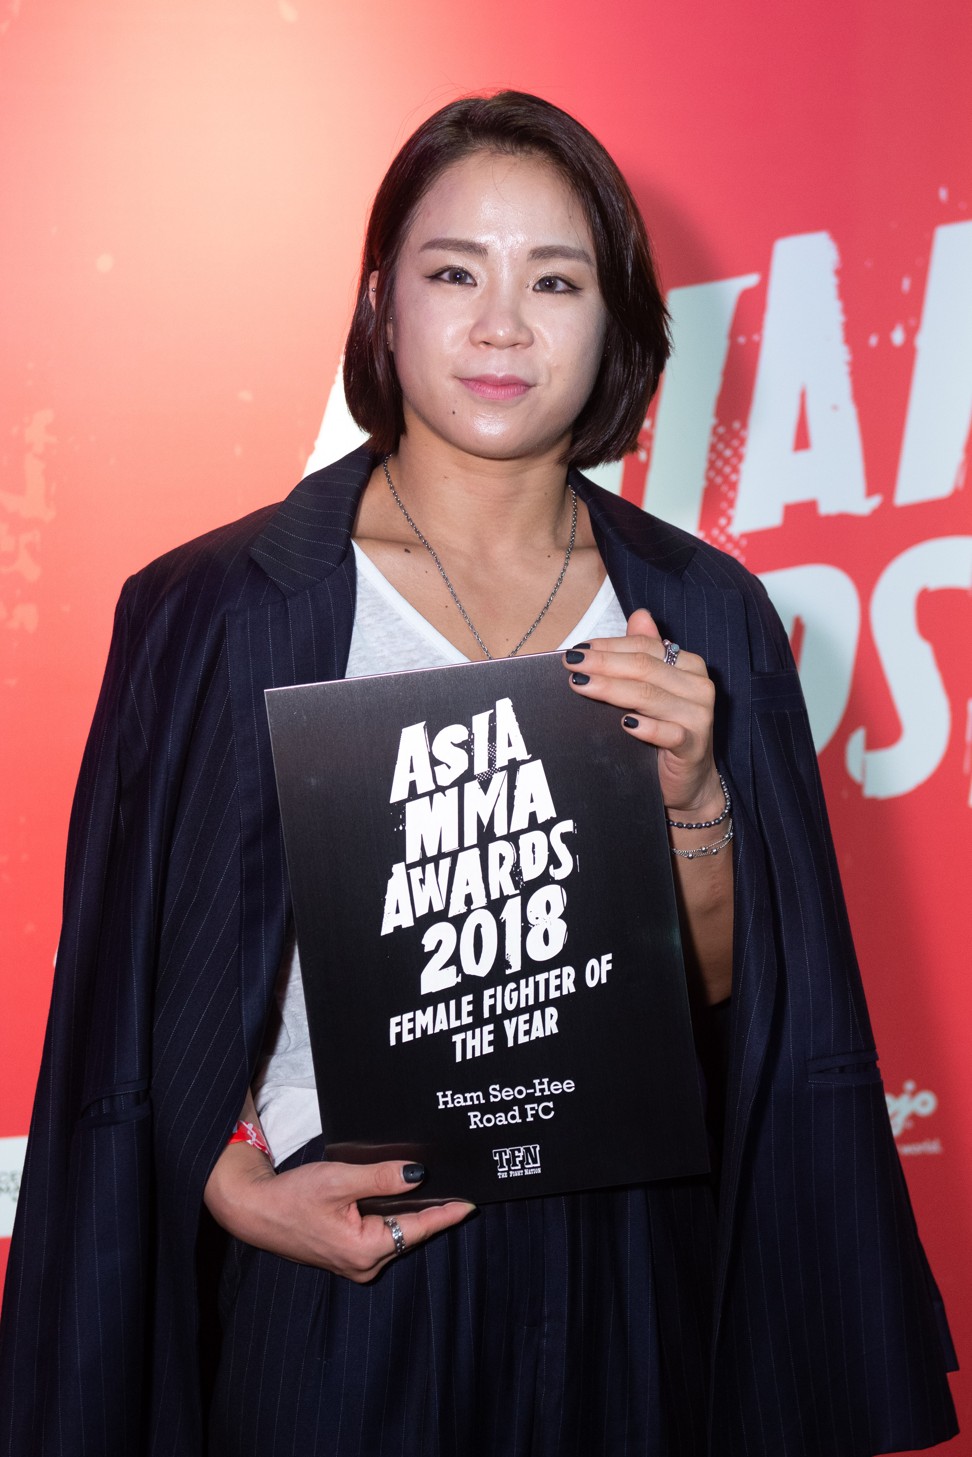 Ham Seo-hee poses with her award.